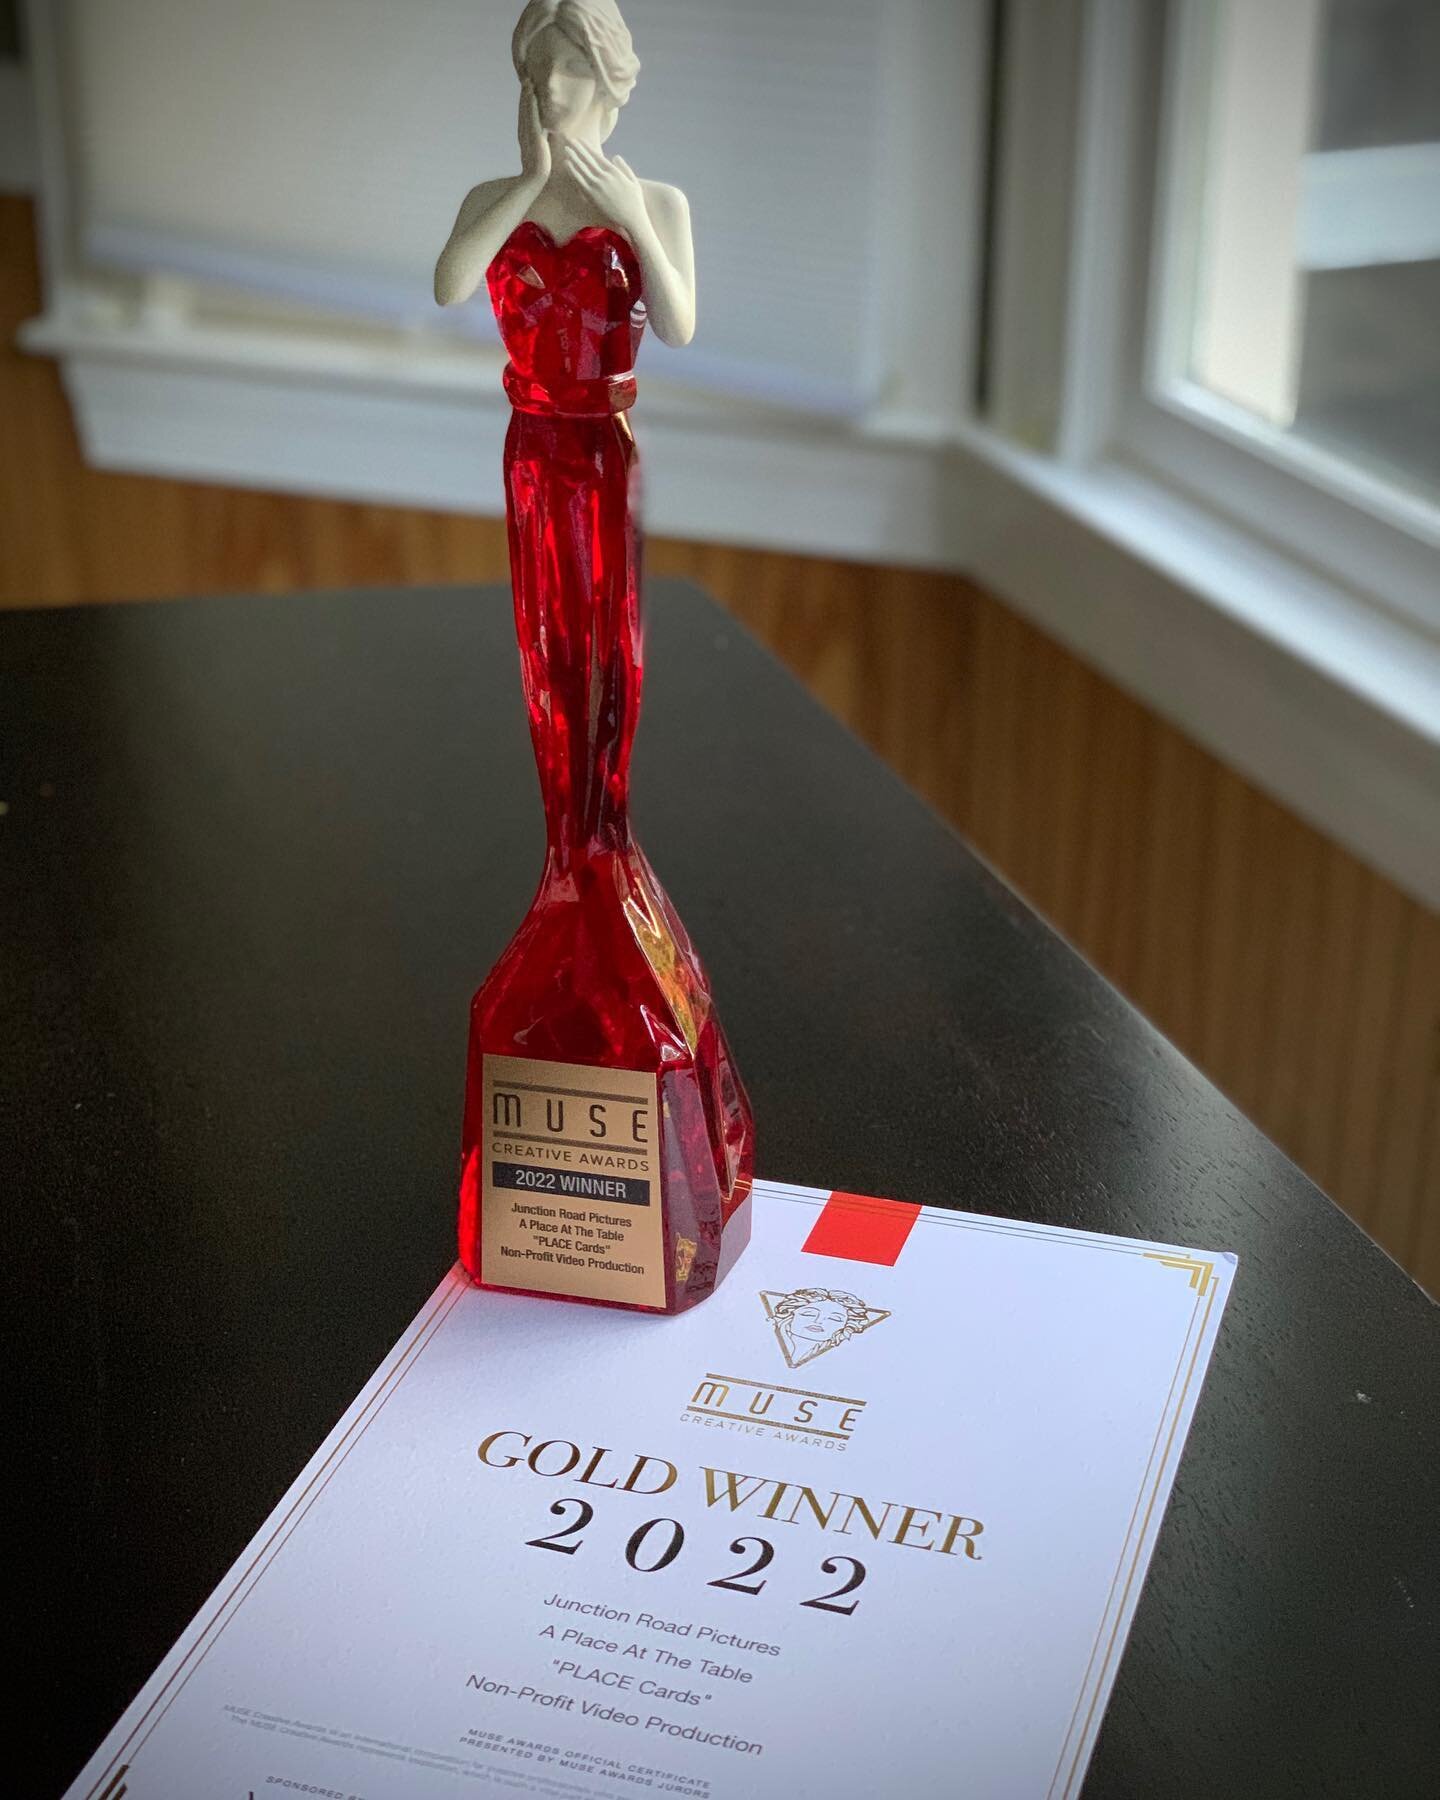 Excited to learn that our &ldquo;PLACE Card&rdquo; video collaboration with @tableraleigh was given a Gold Award from the 2022 Muse Creative Awards! 
.
Congrats and thanks to the Table team and everyone who helped out with this project! 
.
#musecreat